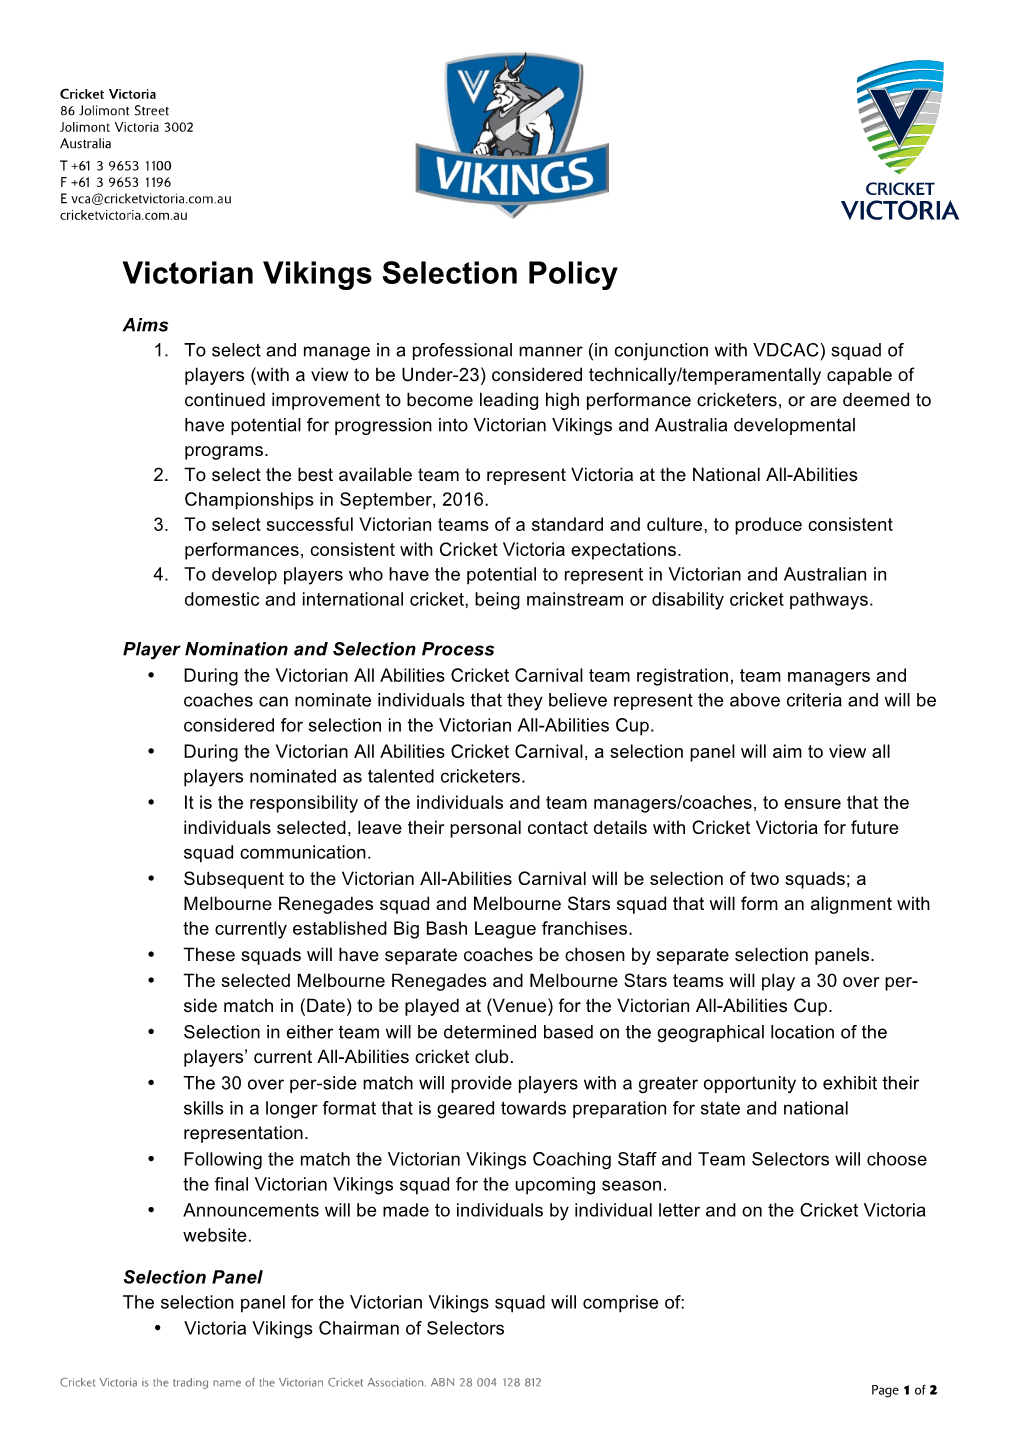 Victorian Vikings Selection Policy